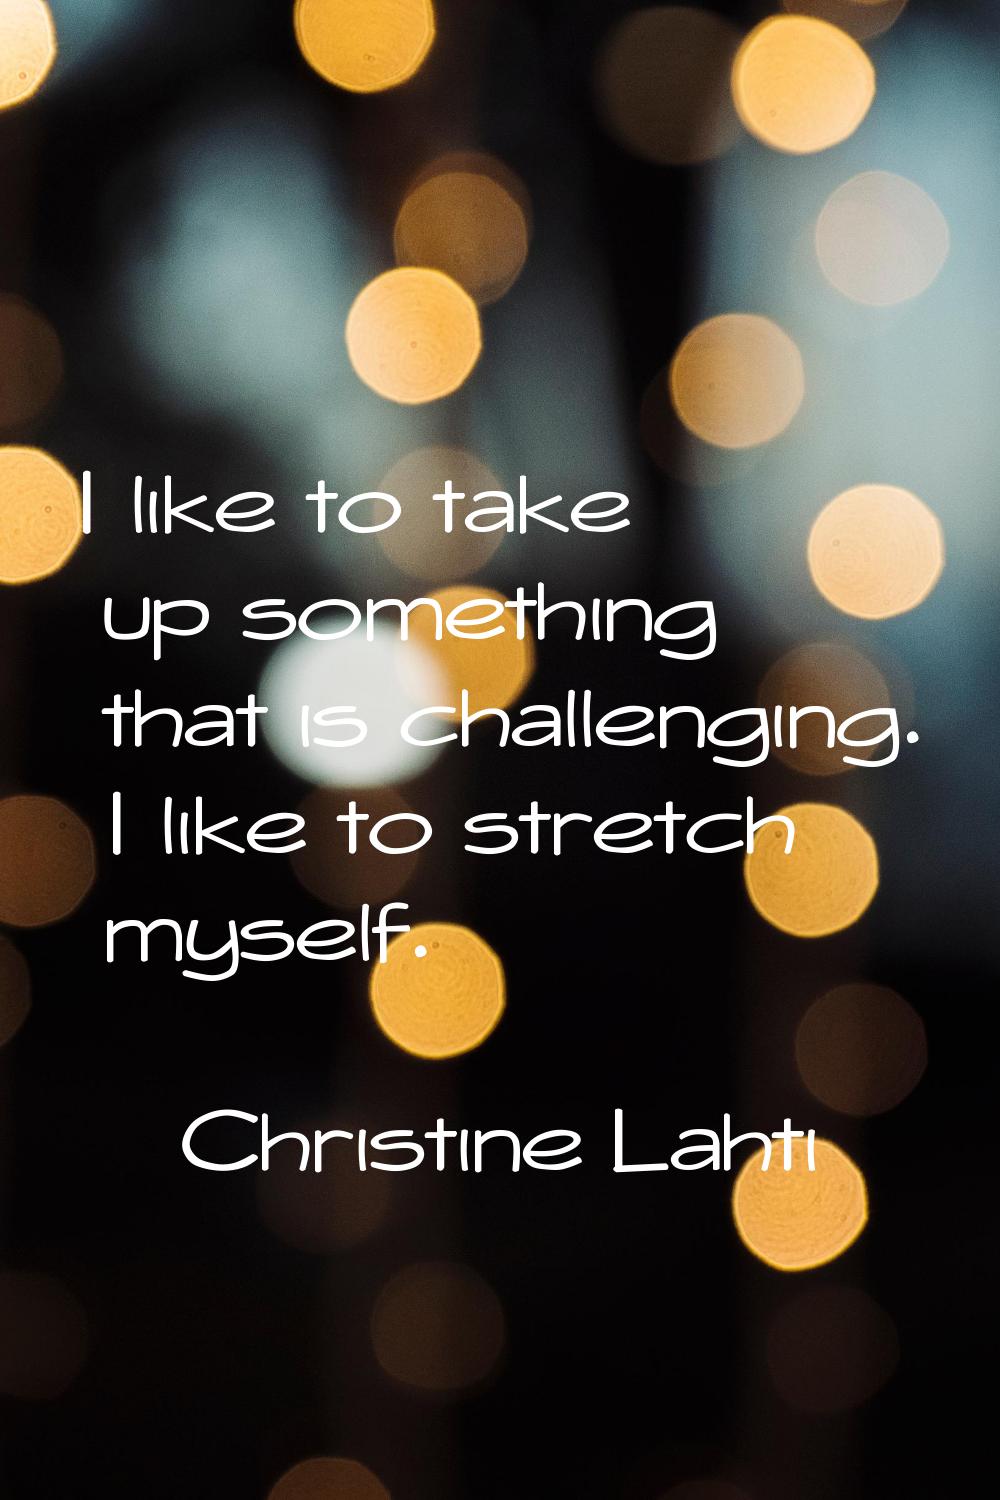 I like to take up something that is challenging. I like to stretch myself.